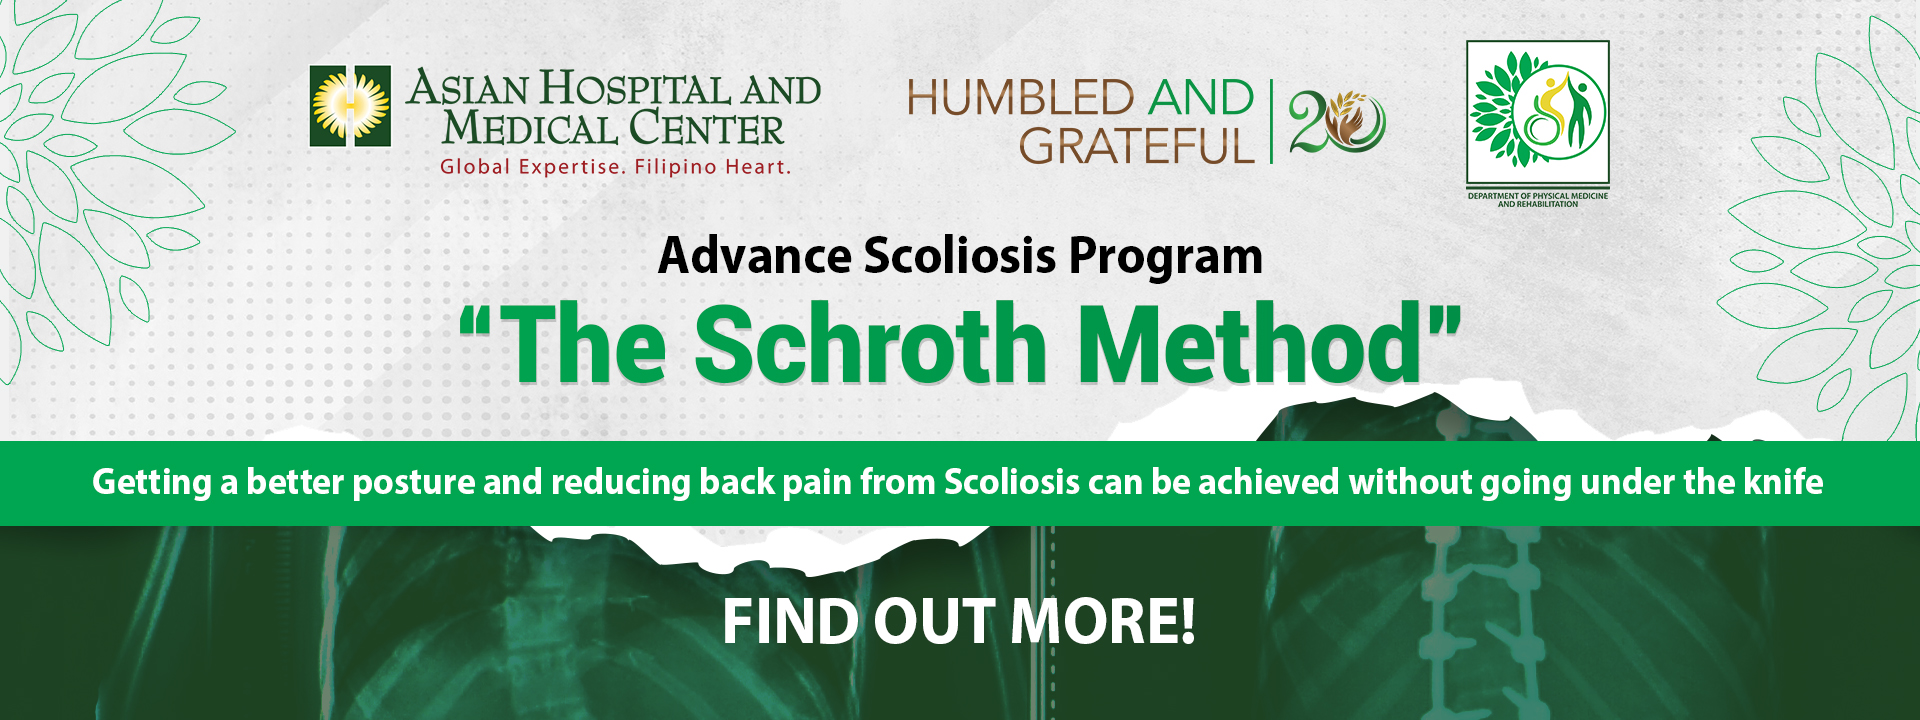 ADVANCE SCOLIOSIS PROGRAM PACKAGE